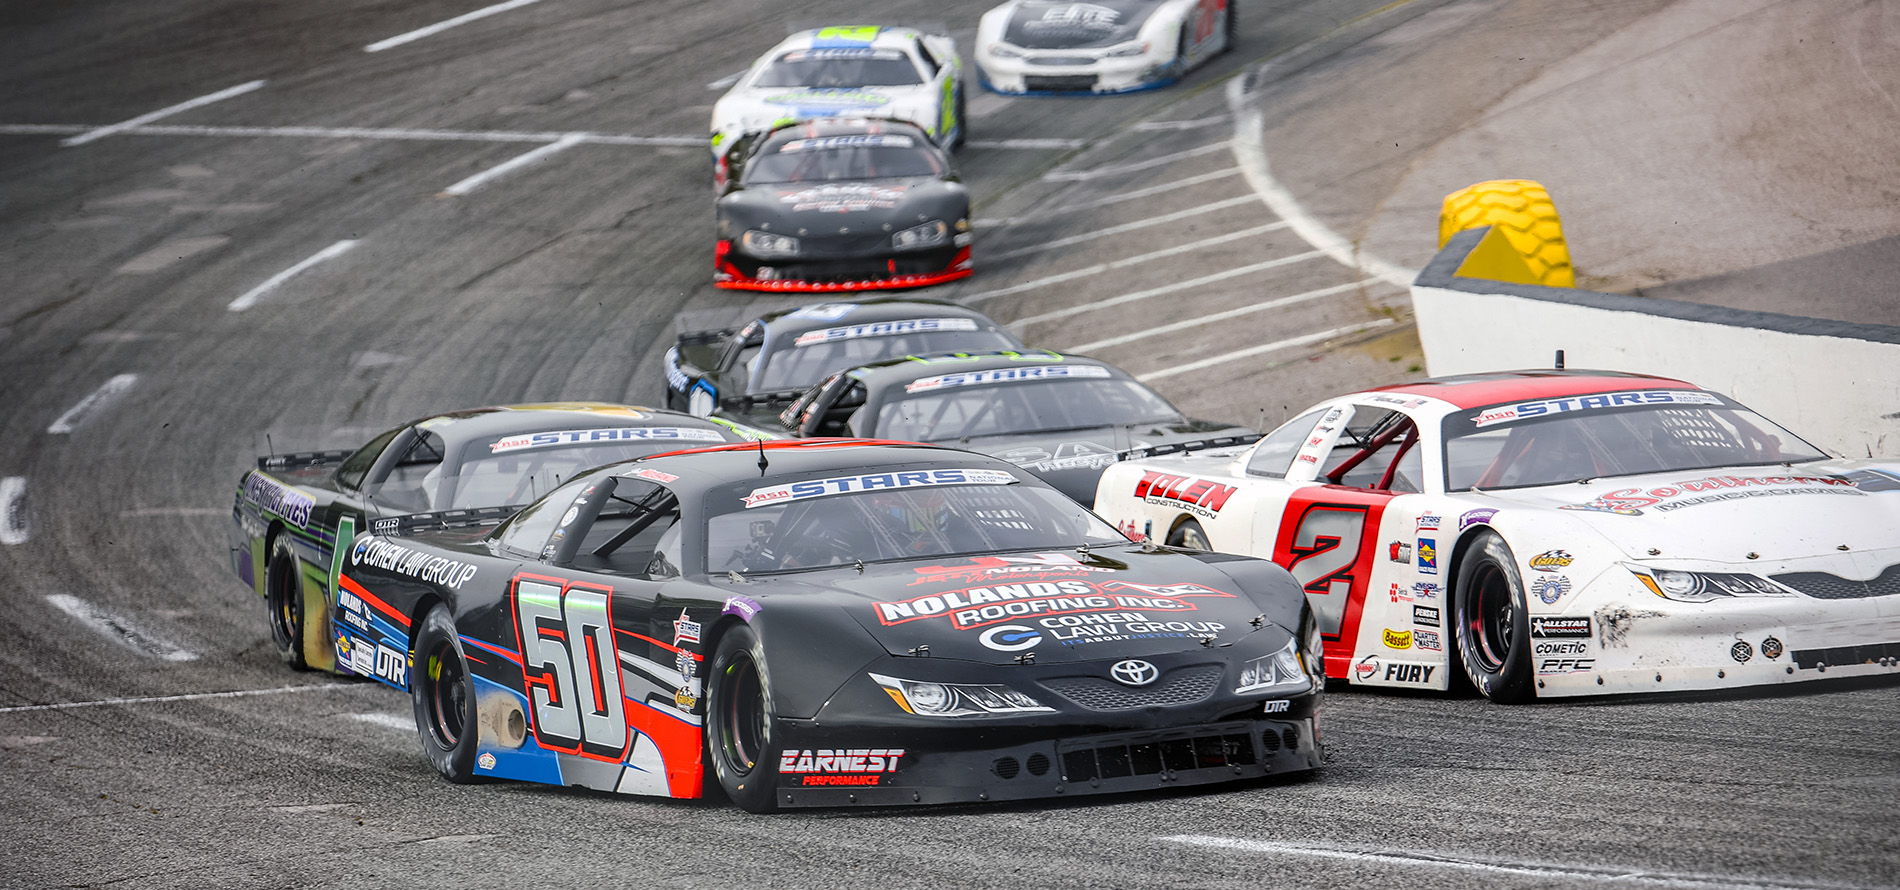 A black stock car with the number 50 Jett Noland with 'Noland's Roofing' and 'Cohen Law Group' sponsorship, branded as a Toyota Camry, races around a curved section of the track. The car navigates close to a white stock car number 2.